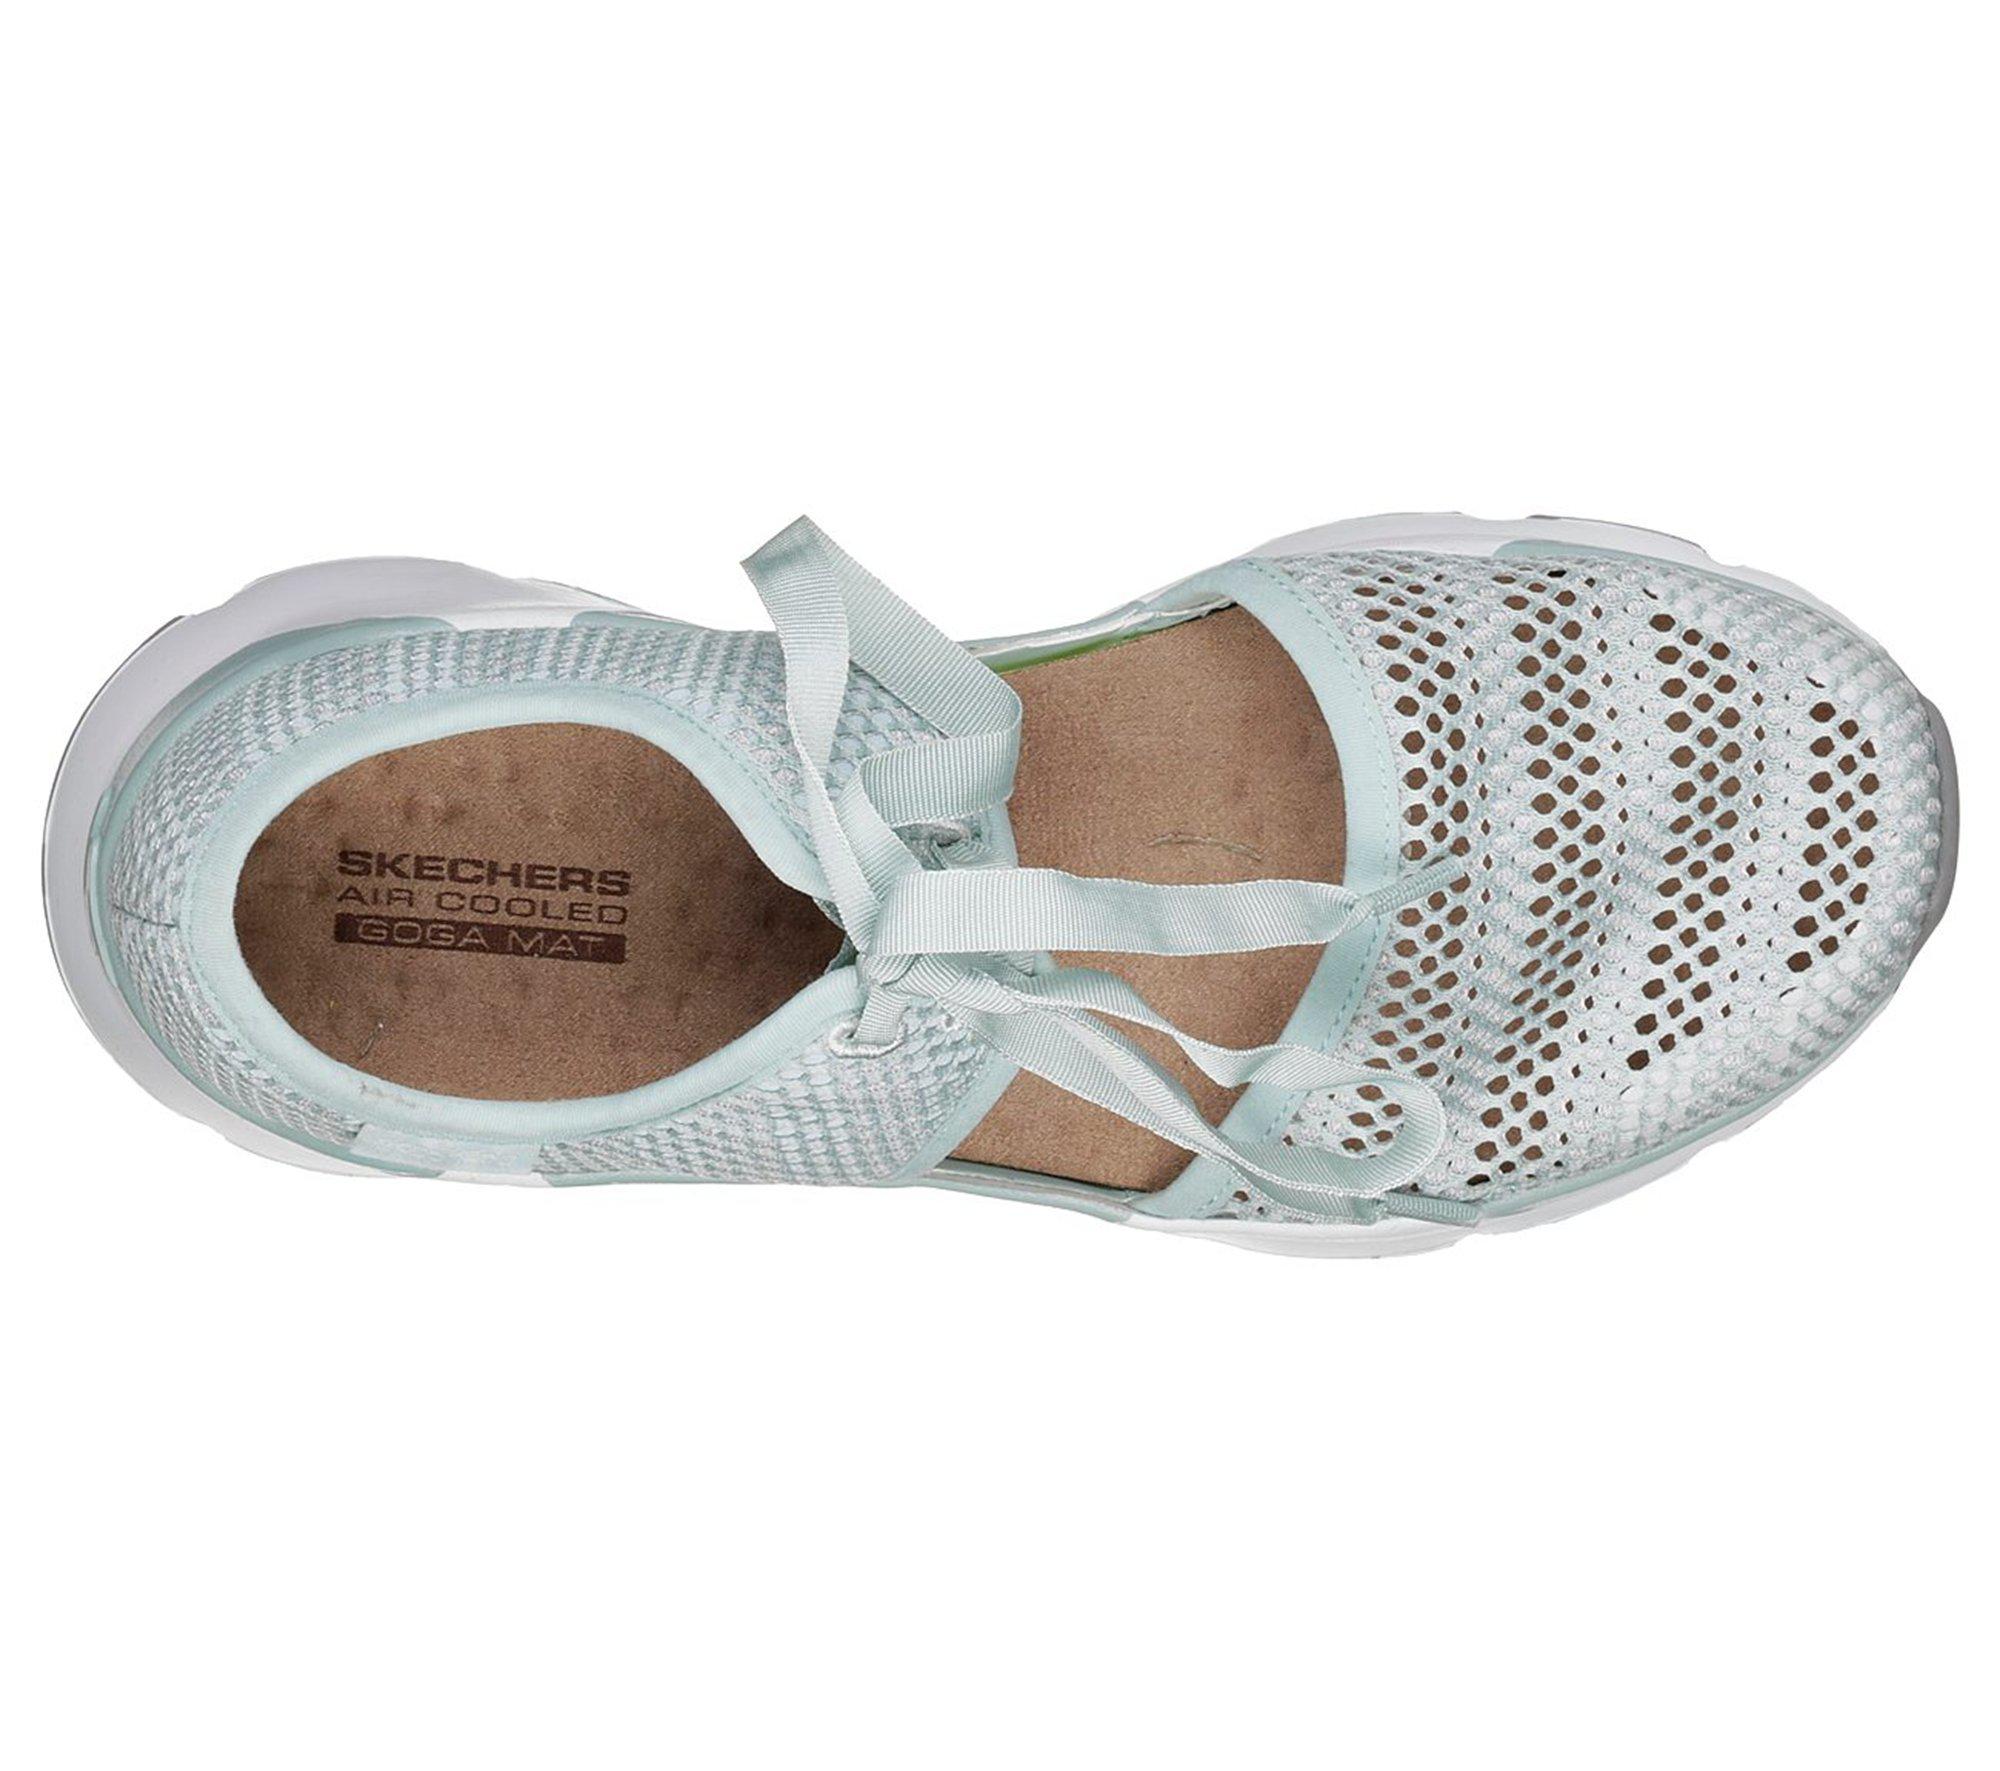 Skechers Lace One Bora - Chantilly in 